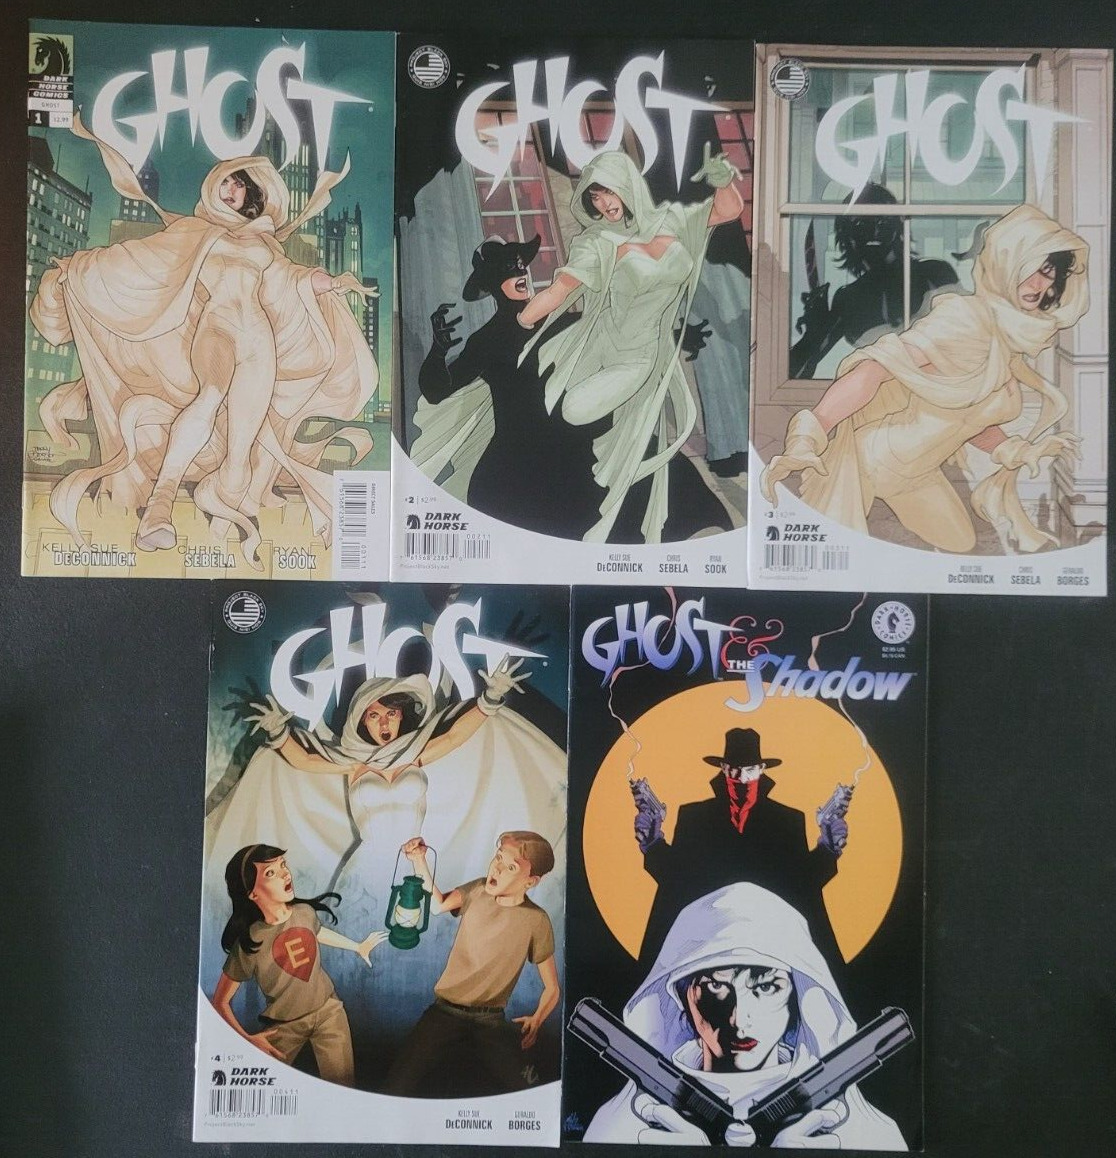 GHOST #1 2 3 4 (2013) DARK HORSE COMICS SET OF 5 ISSUES KELLY SUE DeCONNICK